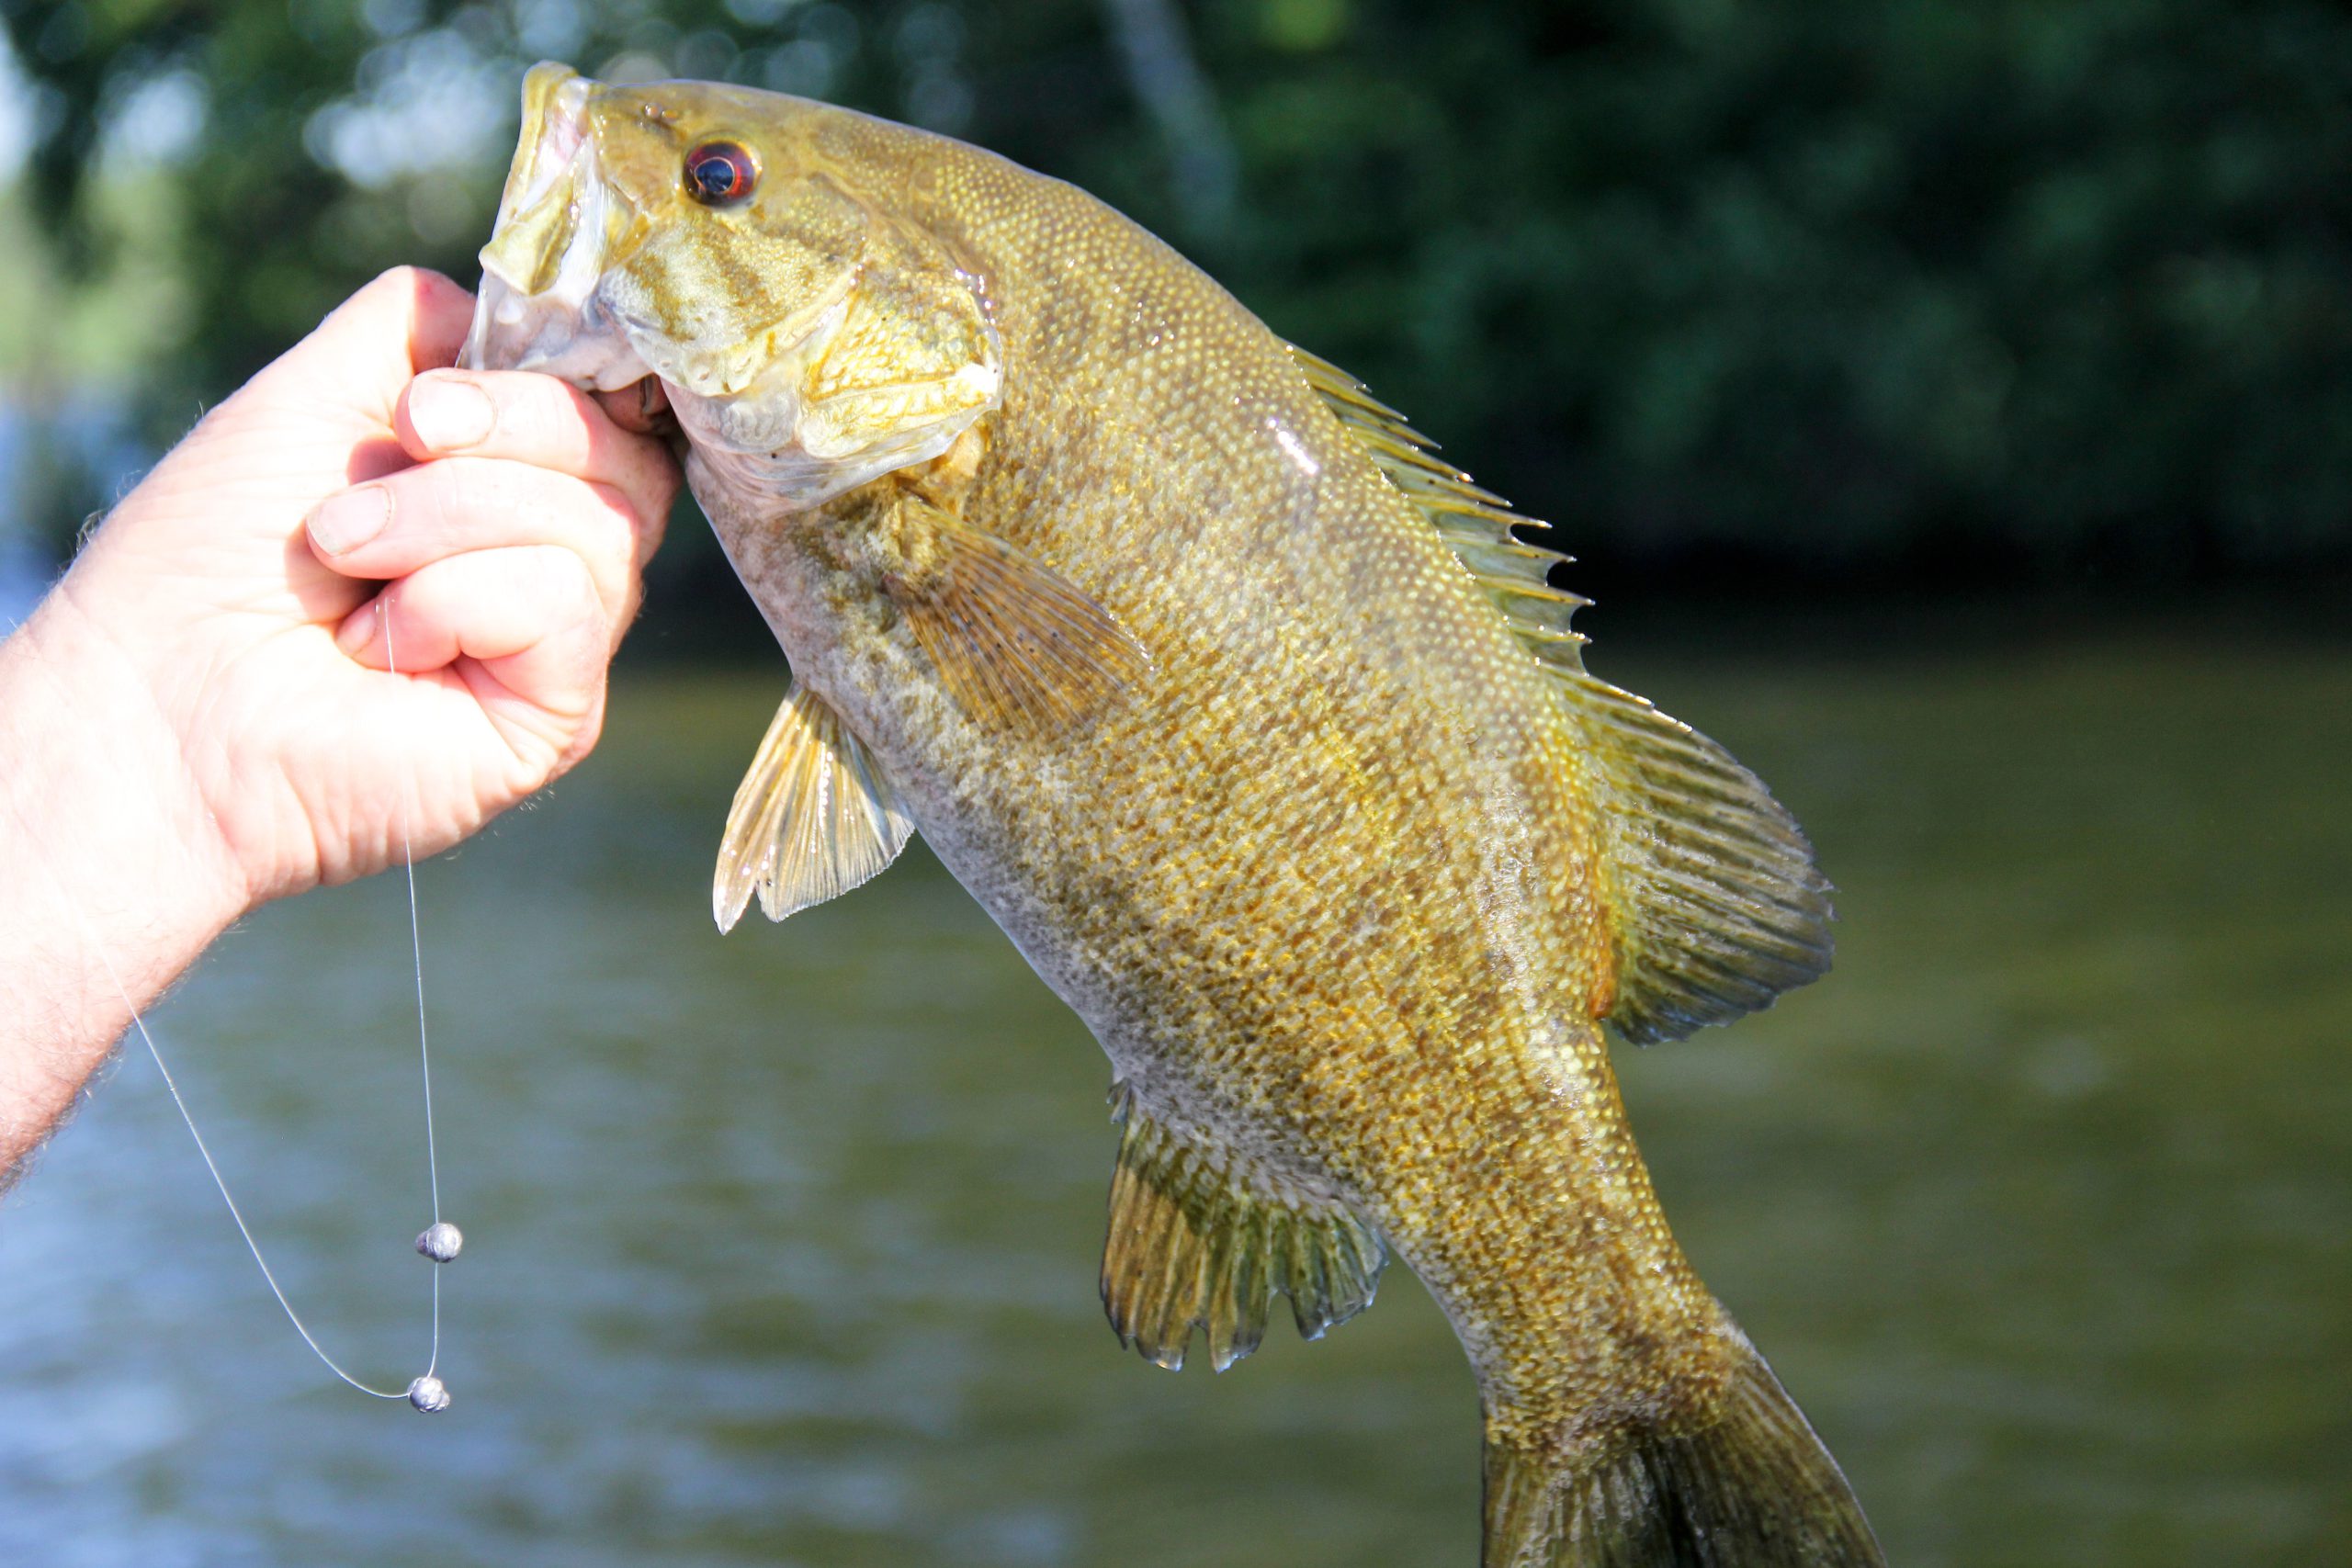 Smallmouth bass with a fishing rig in its mouth being held over water.